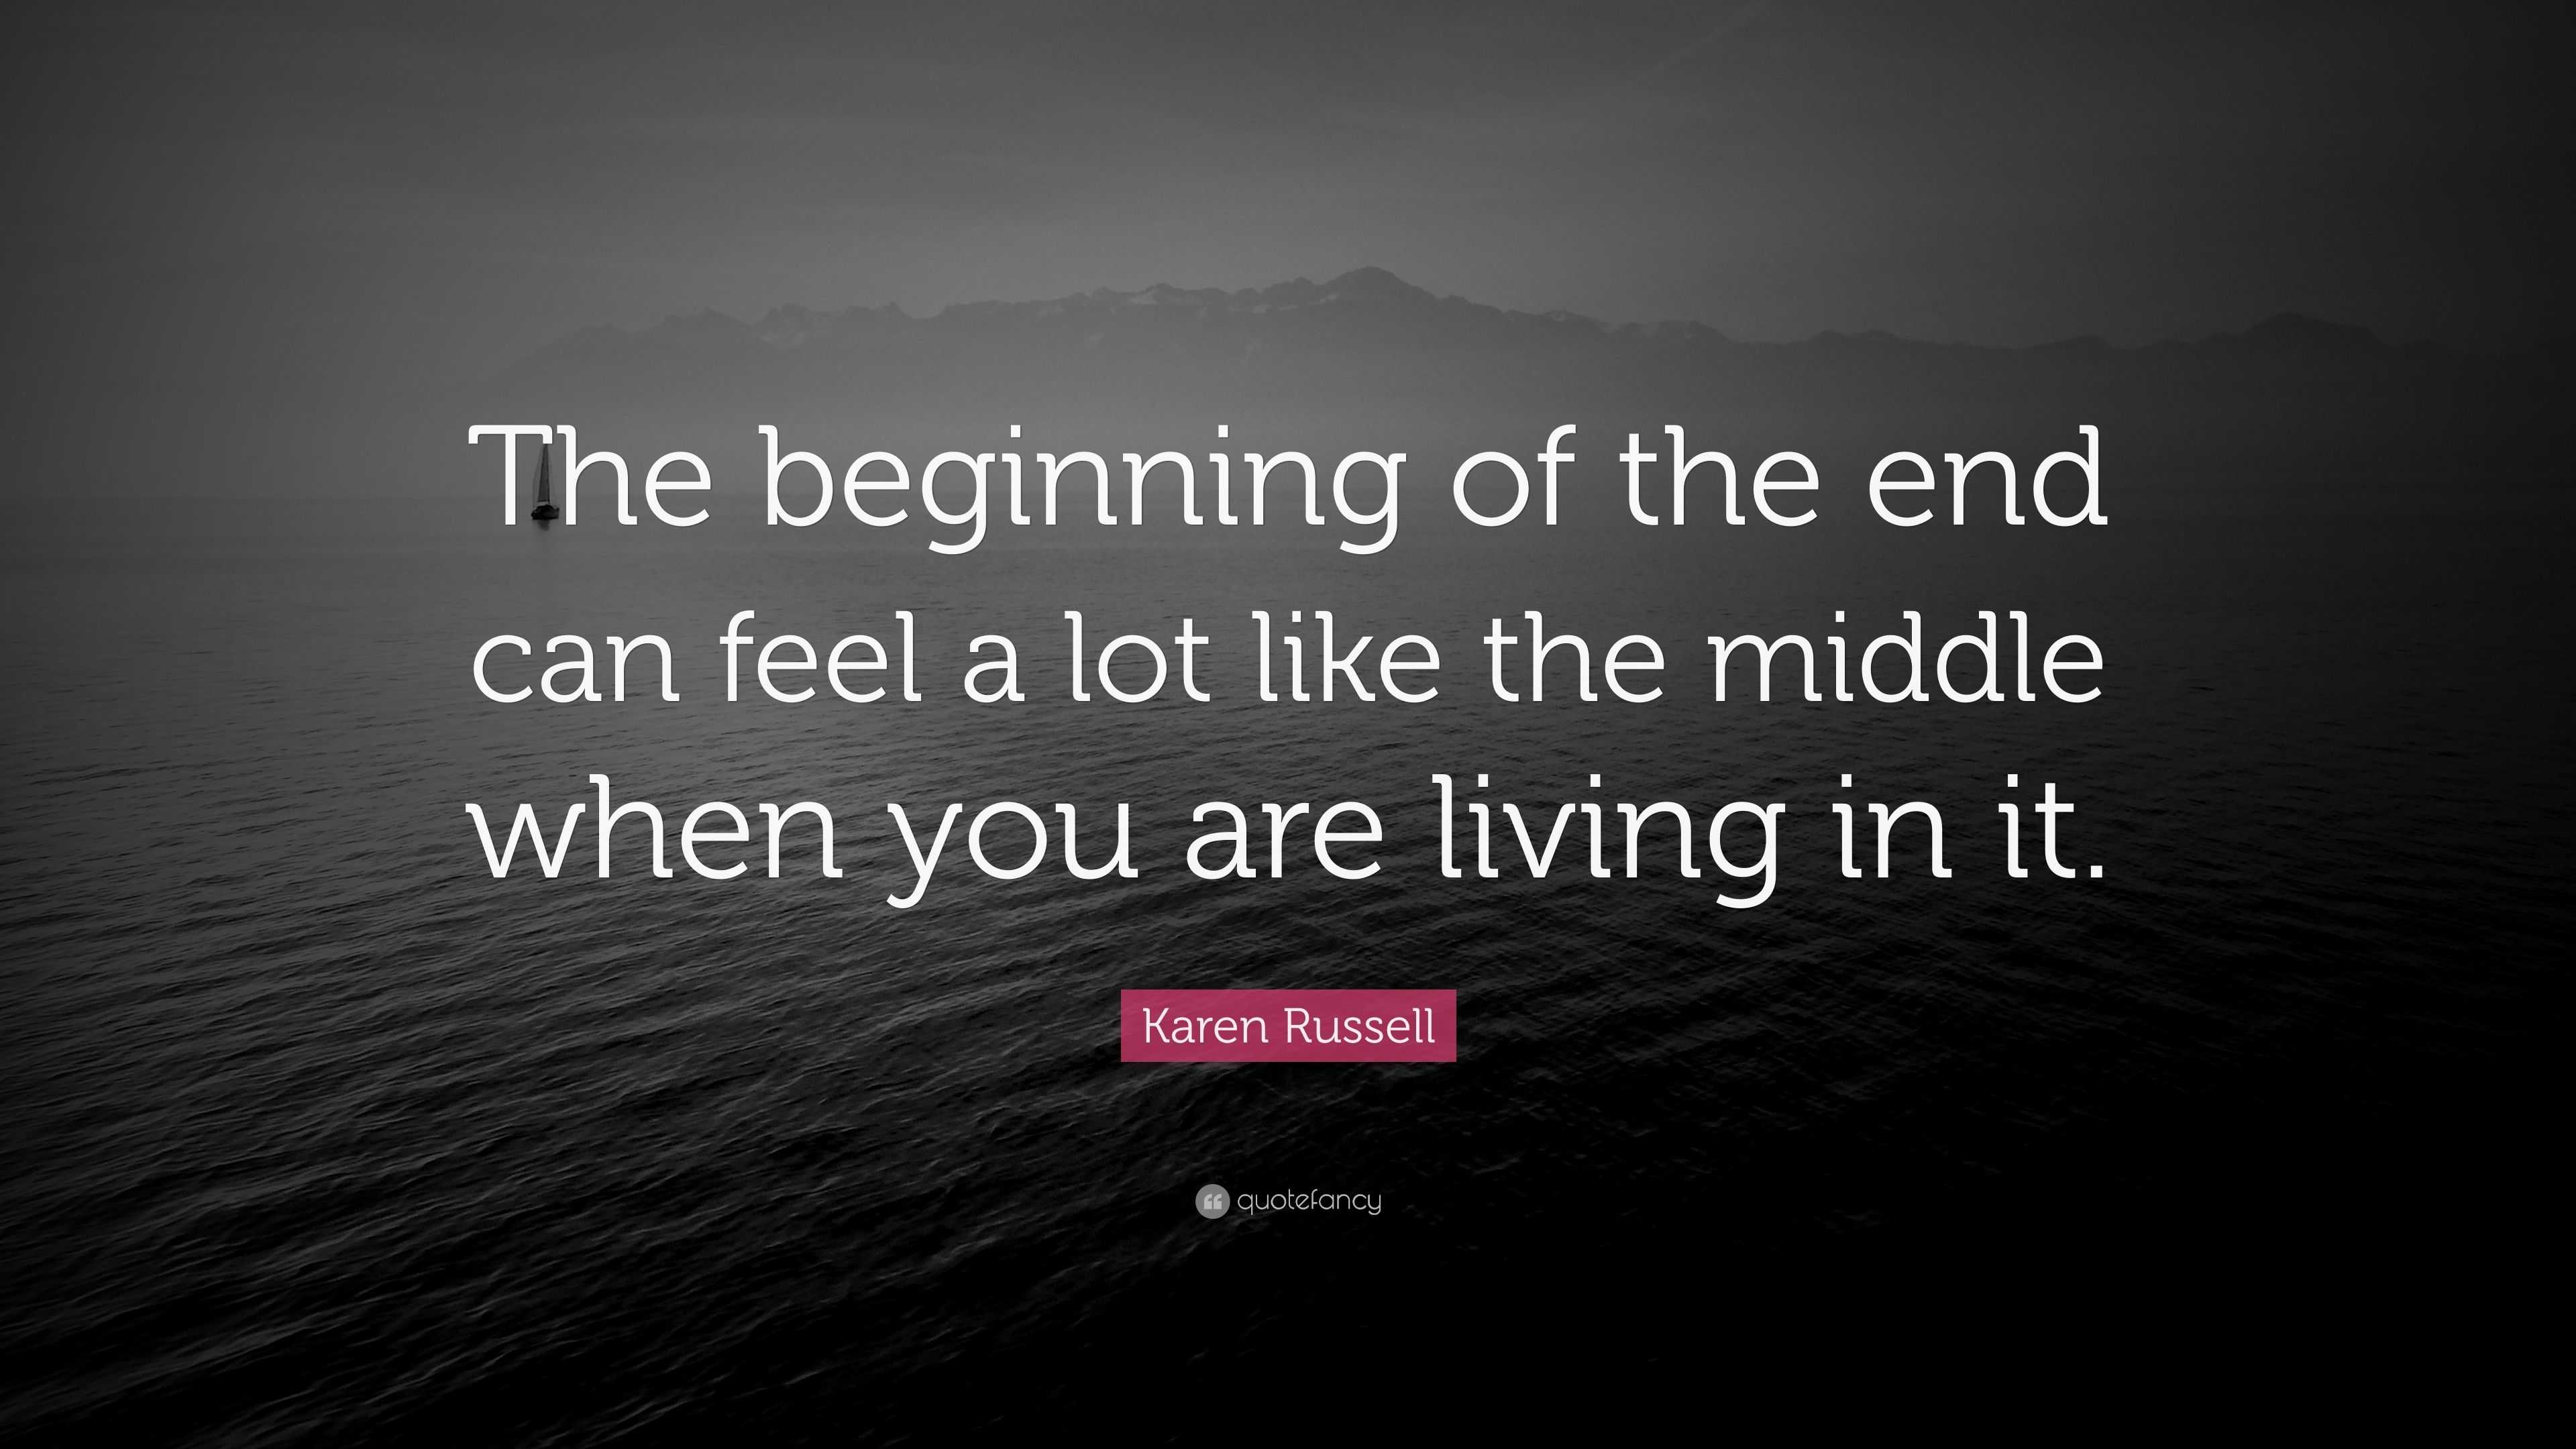 Karen Russell Quote: “The beginning of the end can feel a lot like the